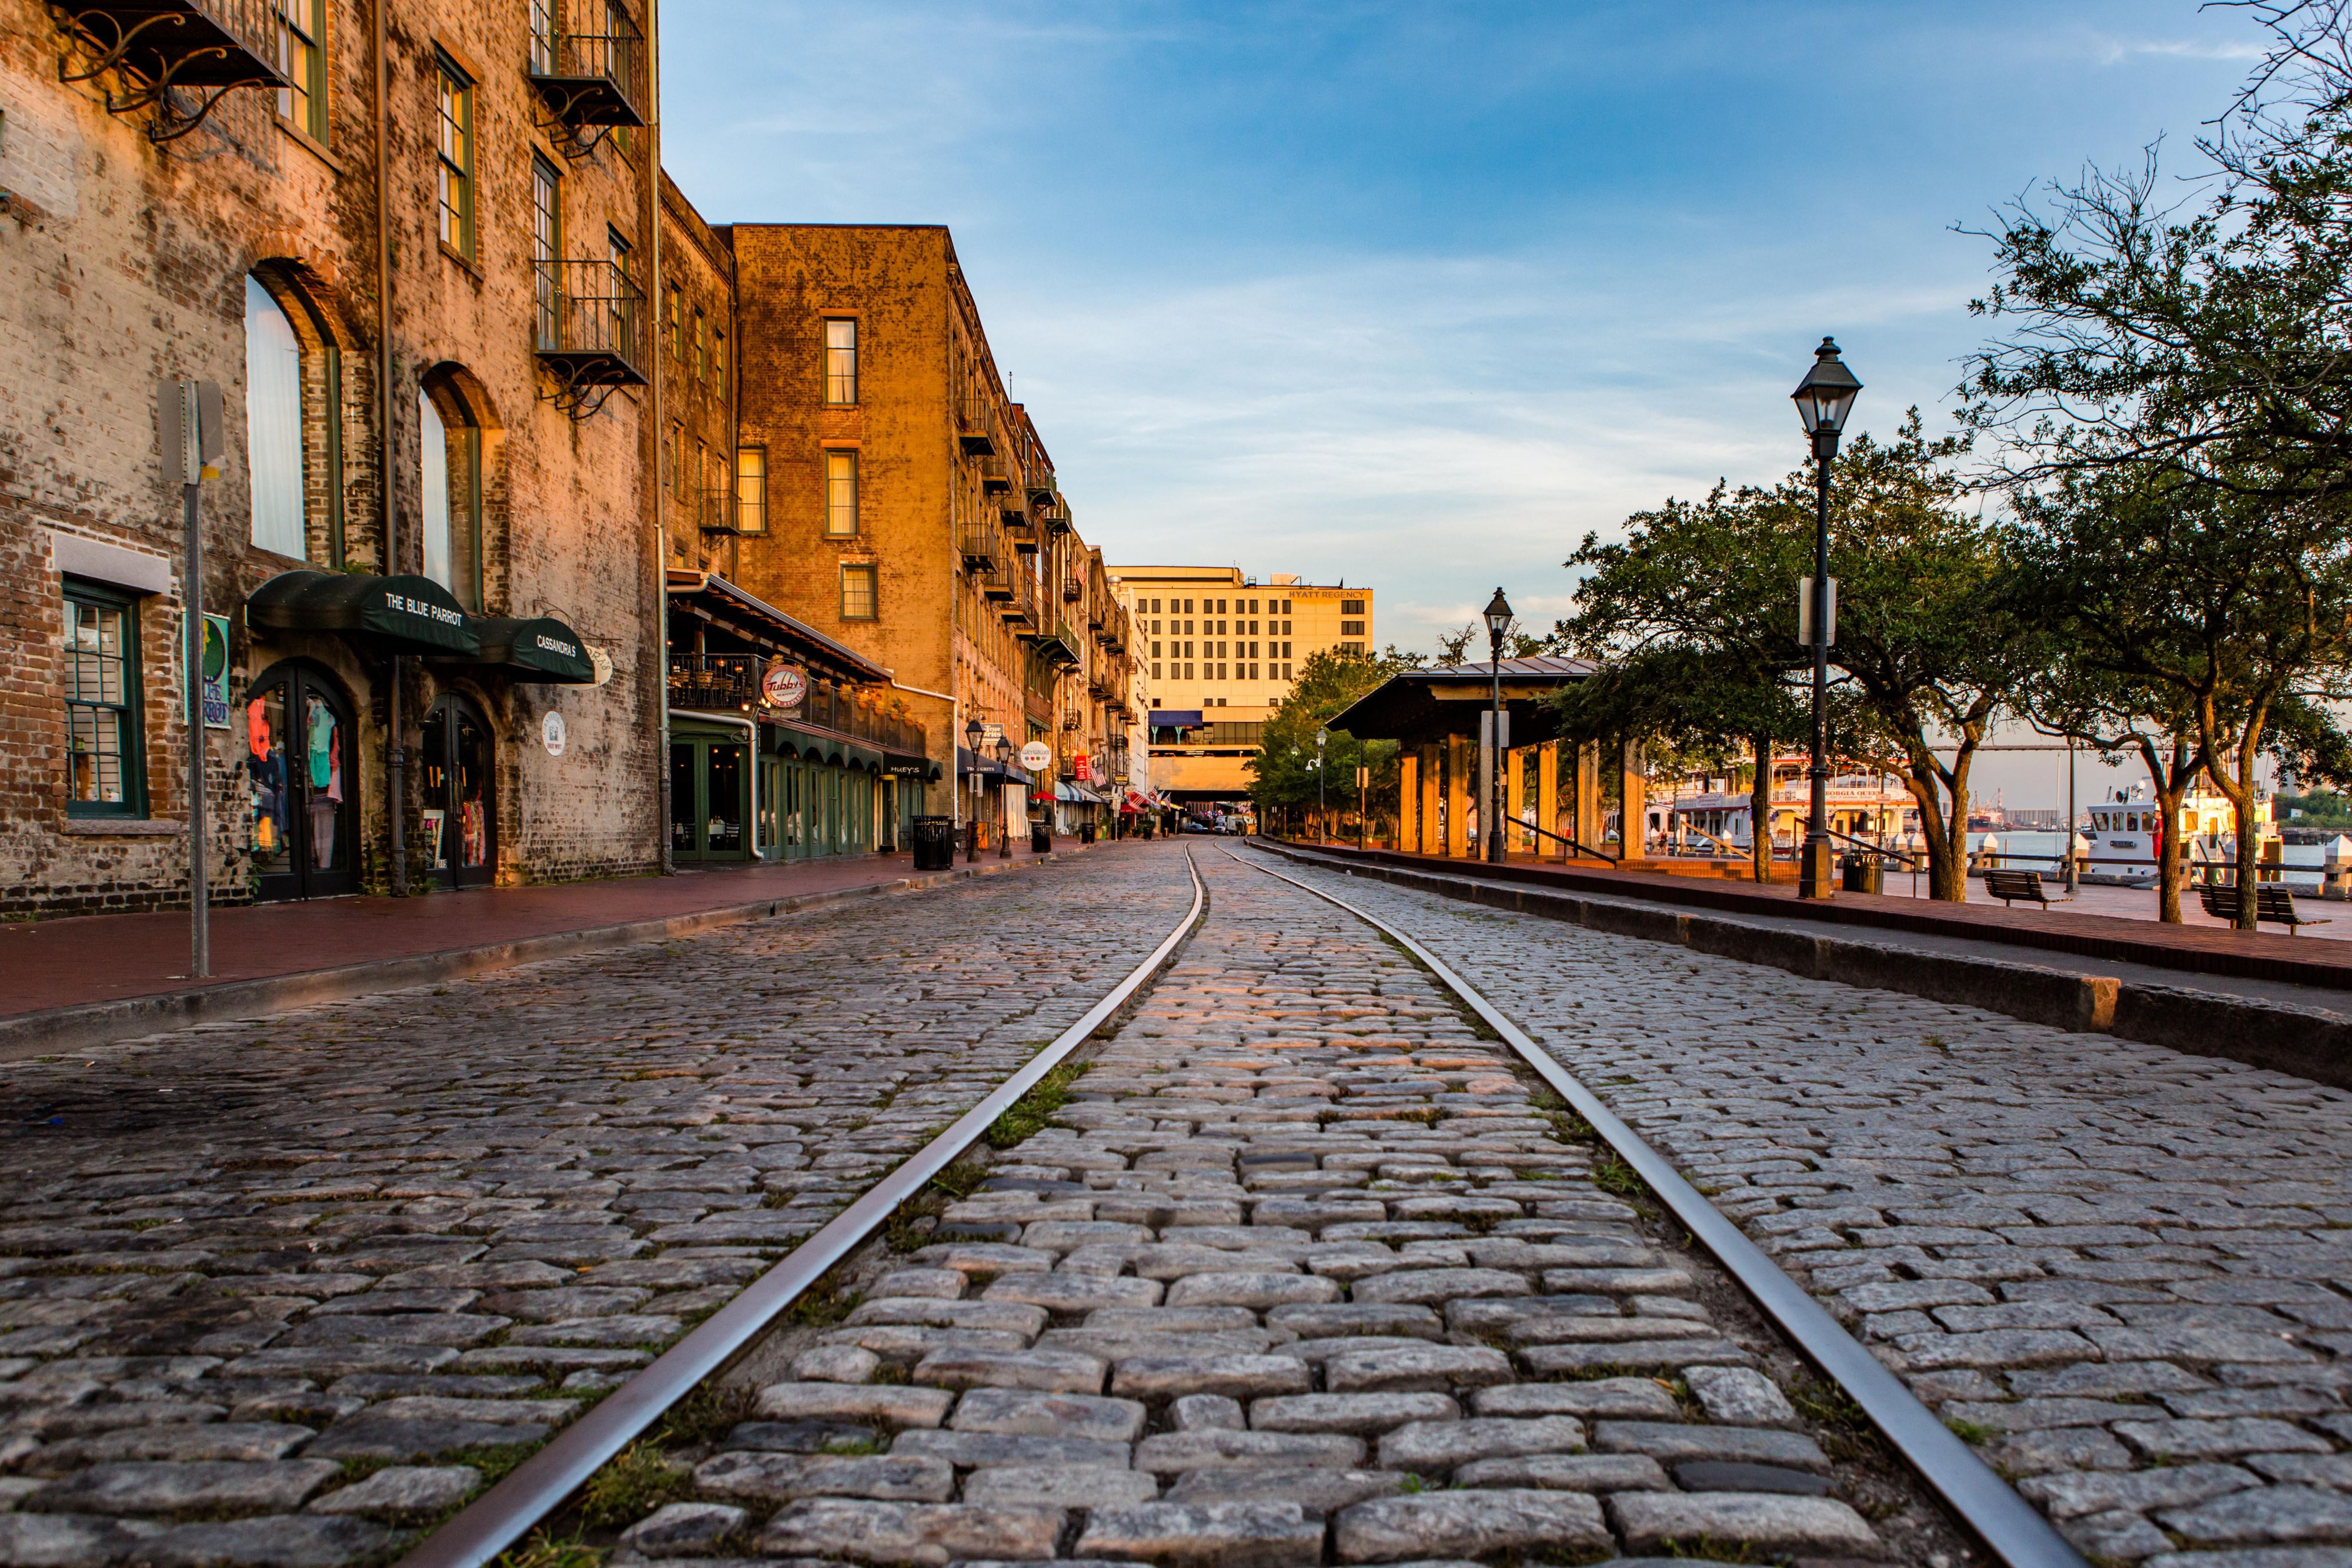 Your stay at Hotel Indigo Savannah Historic District places you just steps from the city’s most popular features and attractions.  City Market is directly adjacent to us, while River Street and Broughton Street Shopping are less than two blocks away.